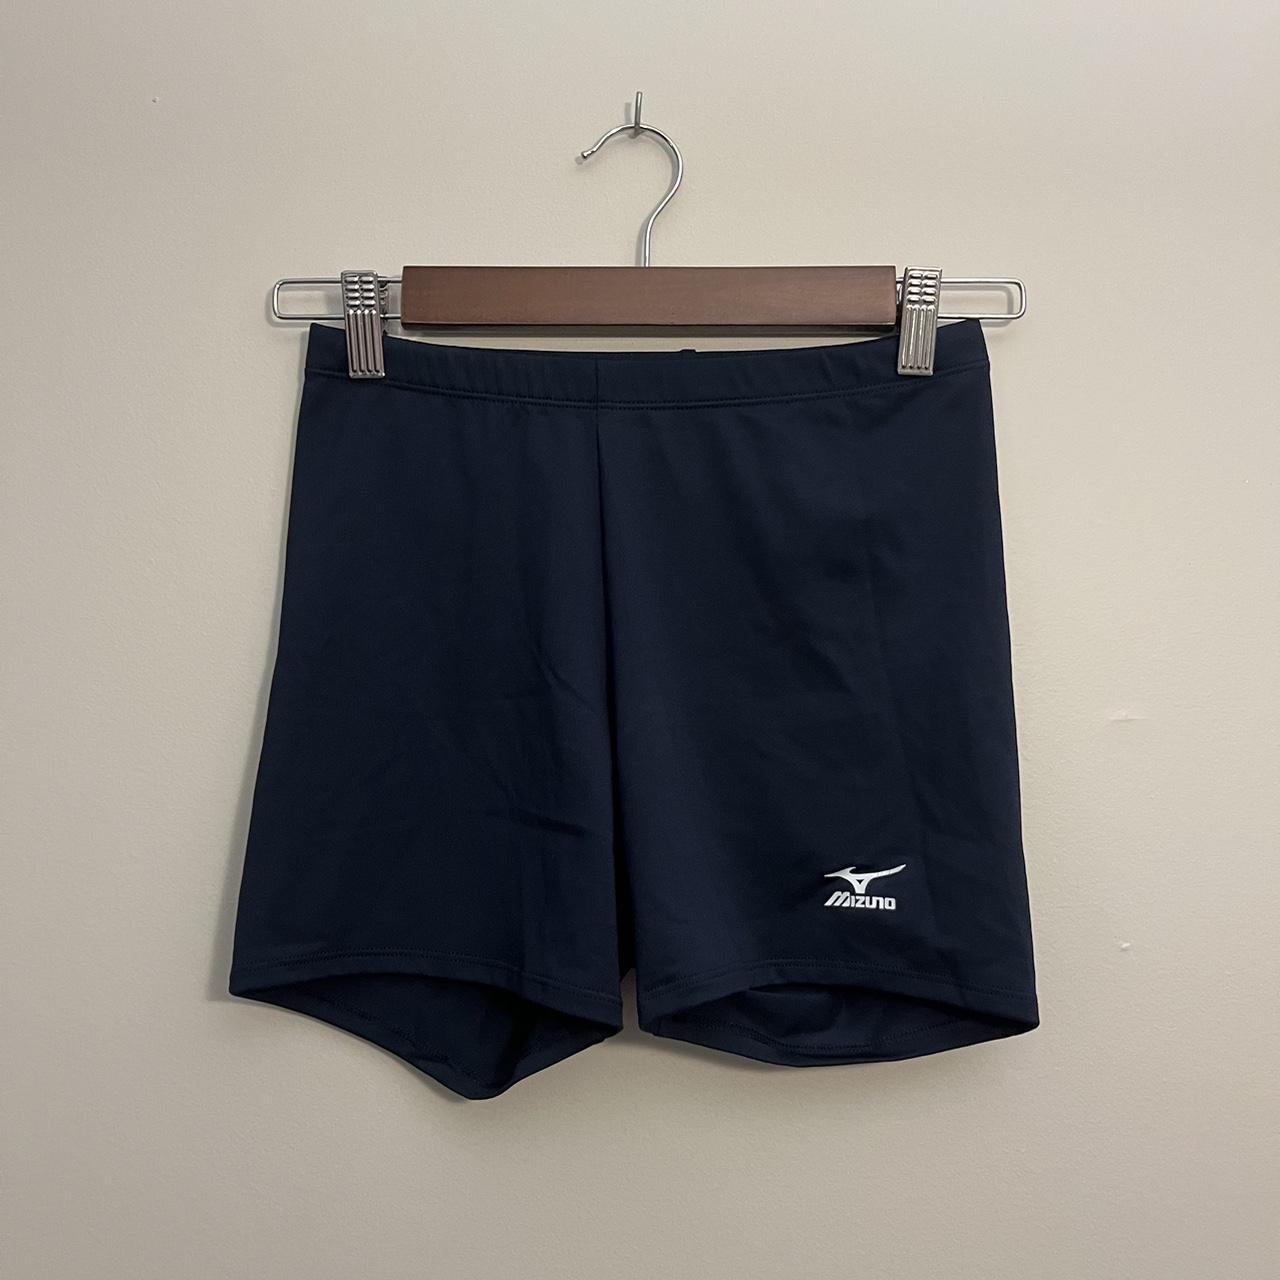 Mizuno volleyball spandex (2 available, same style - Depop